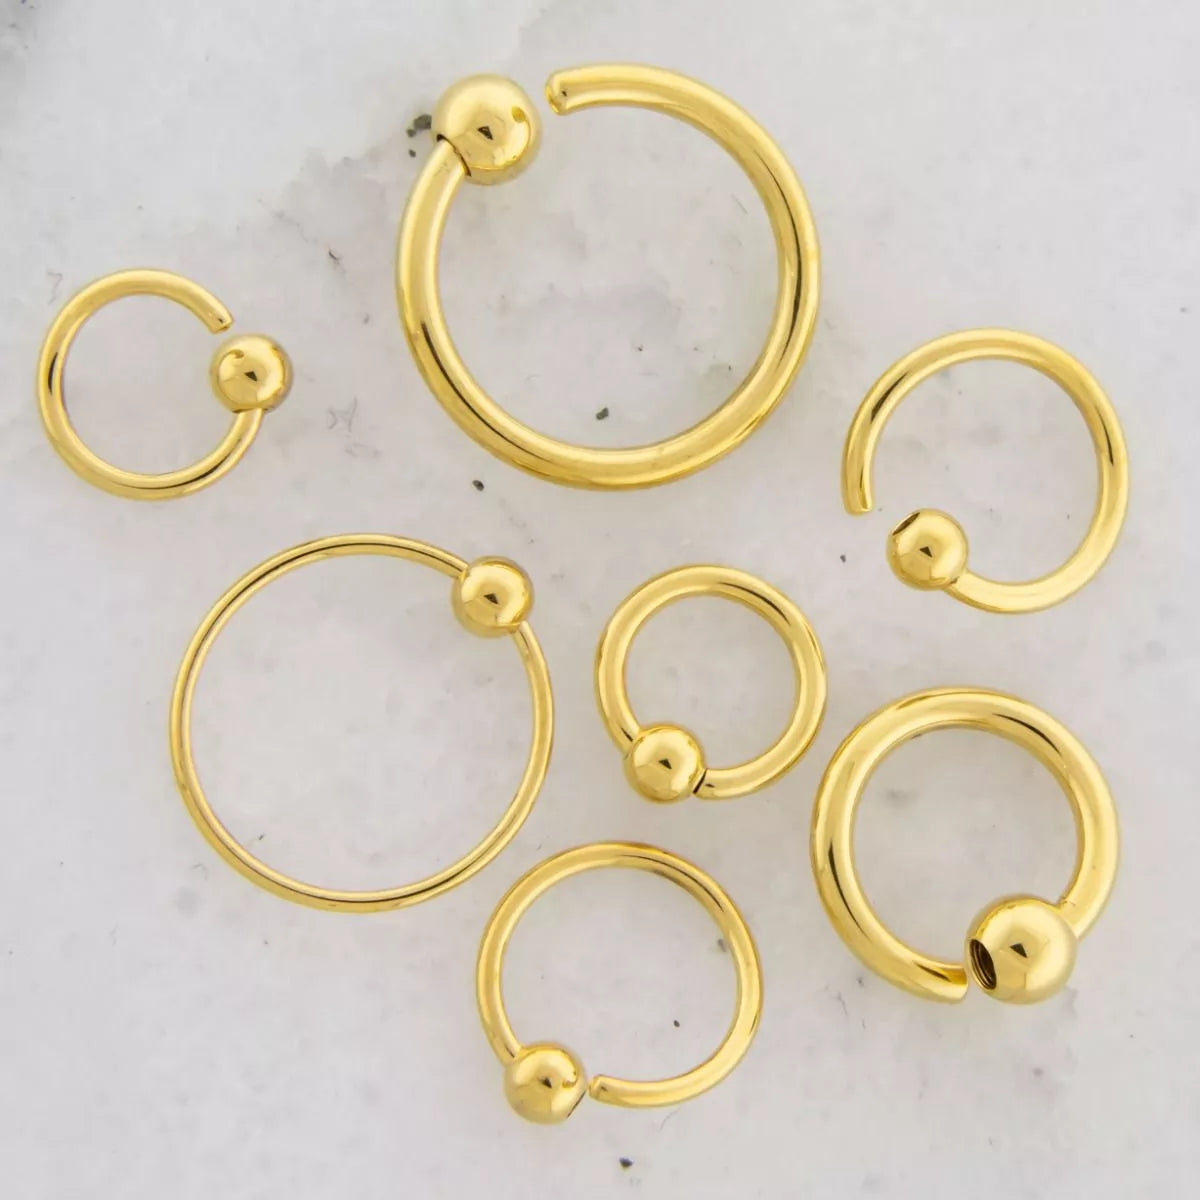 CAPTIVE BEAD RING Gold PVD Fixed Bead Captive Ring - 1 Piece -Rebel Bod-RebelBod